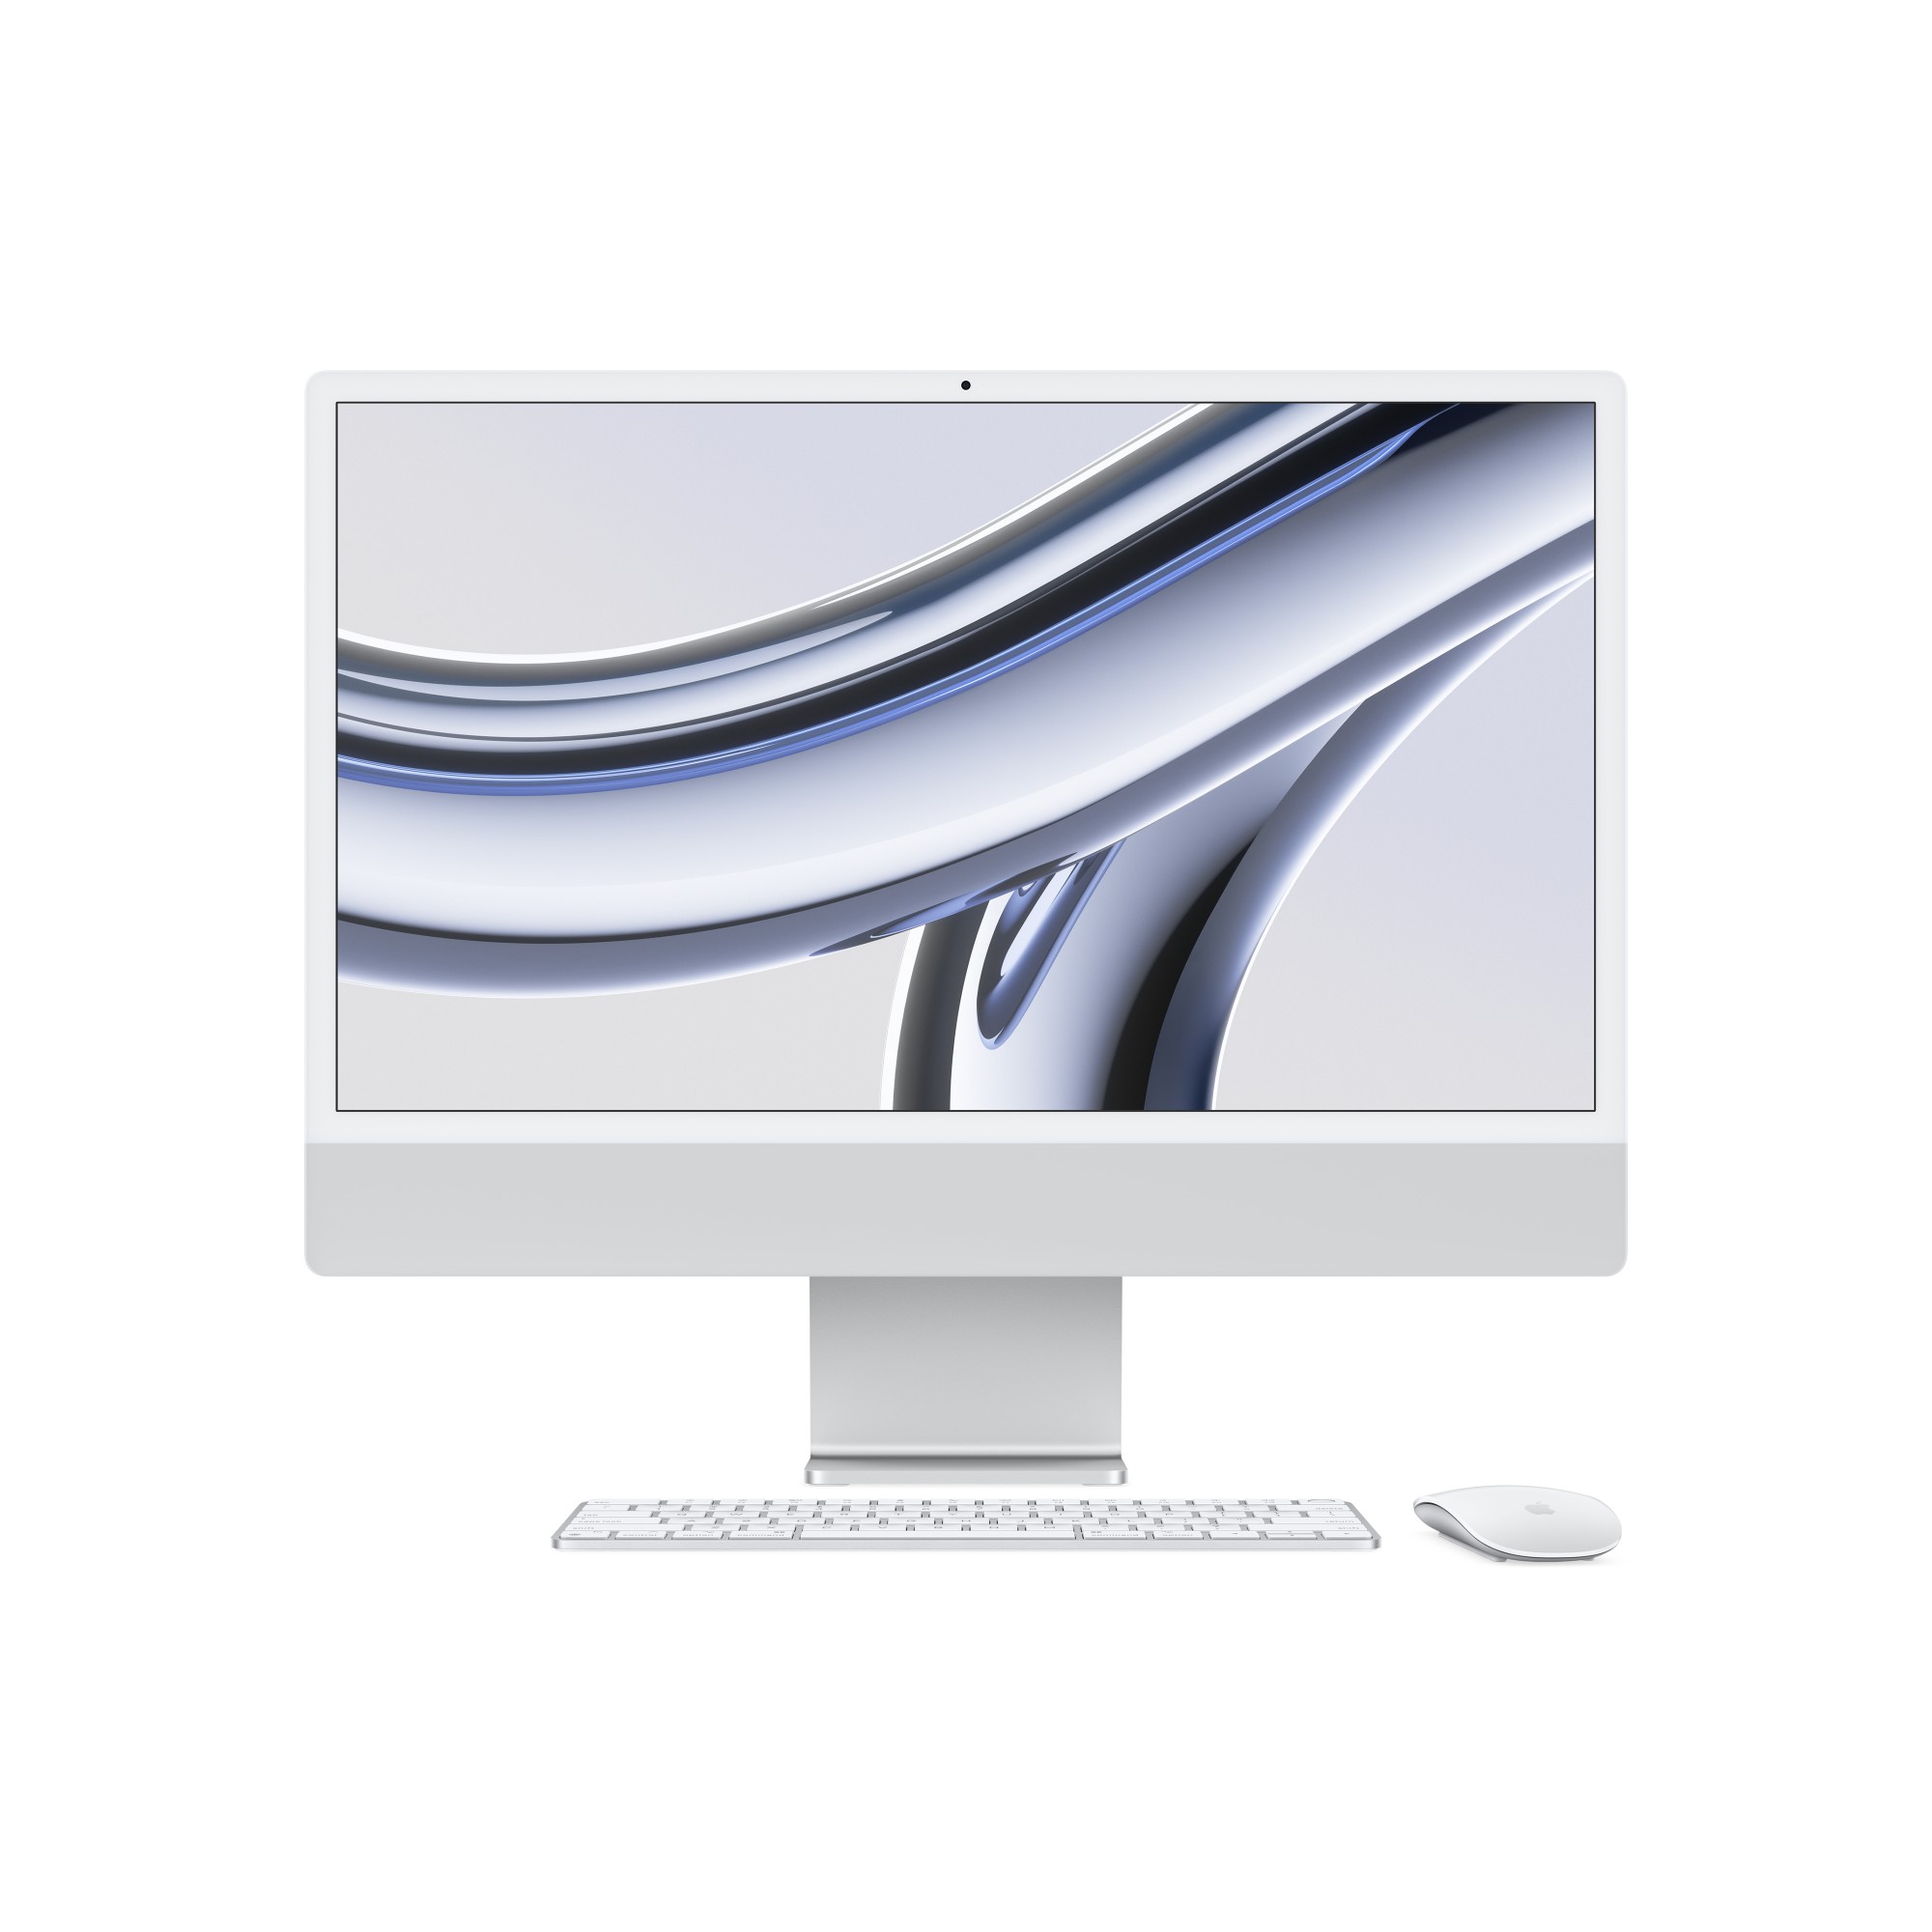 Z195_3926_GB_CTO APPLE CTO/iMac 24 M3/Apple M3 chip with 8-core CPU with 4 performance cores and 4 efficiency cores, 8-core GPU and 16-core Neural Engine/8GB unified memory/256GB SSD storage/Apple Magic Keyboard - UK English (Please note: Power supply must be selected separatel